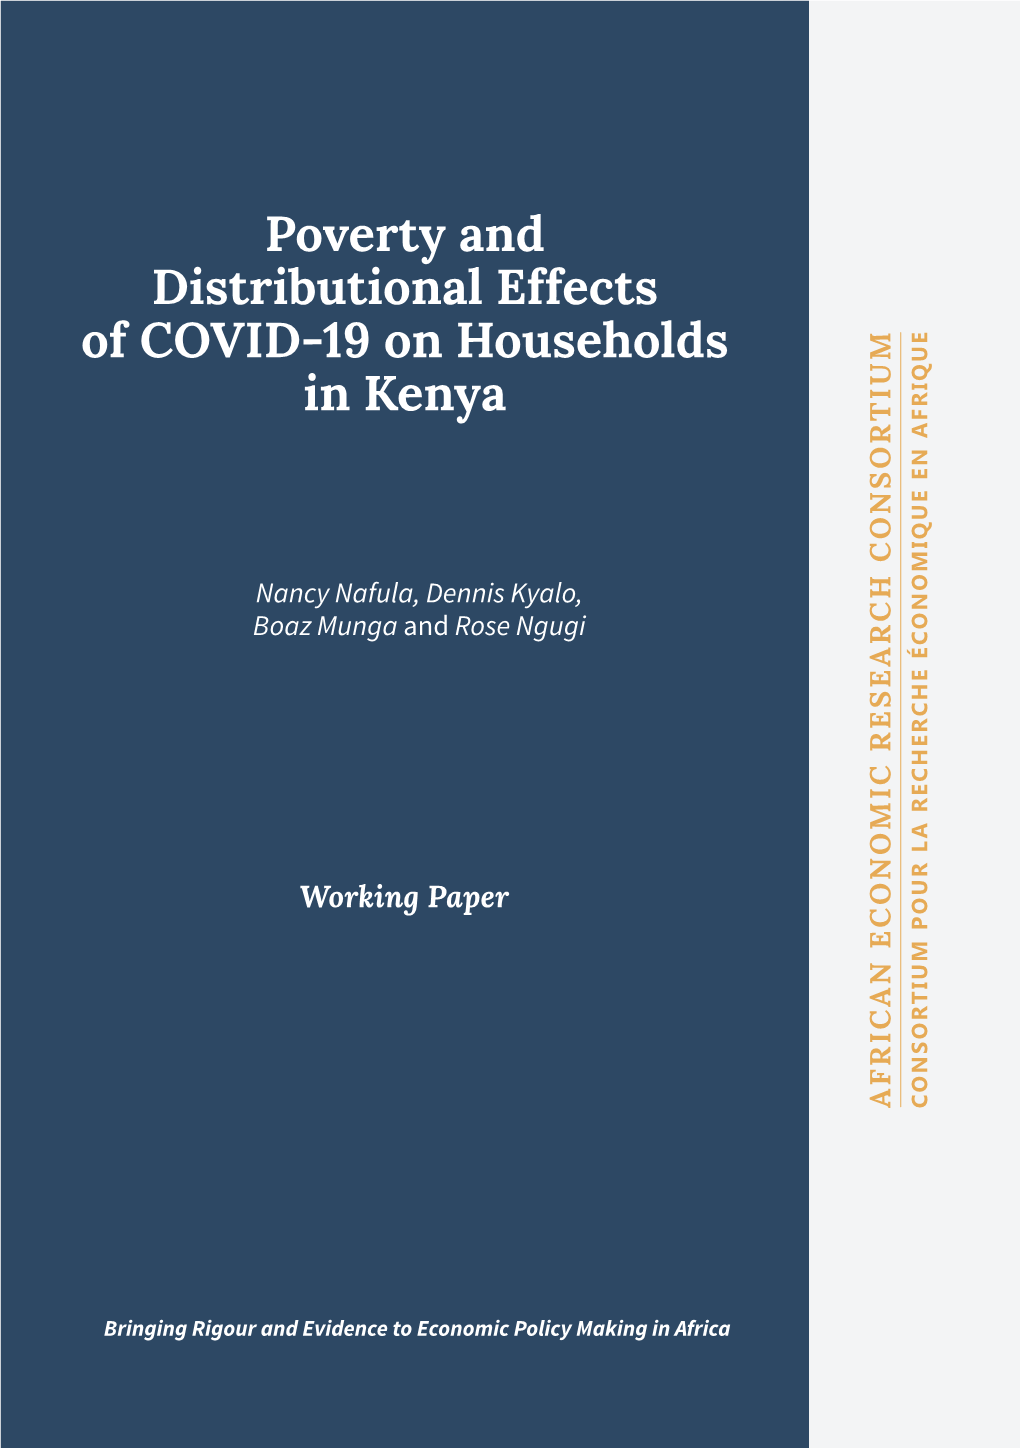 Poverty and Distributional Effects of COVID-19 on Households in Kenya